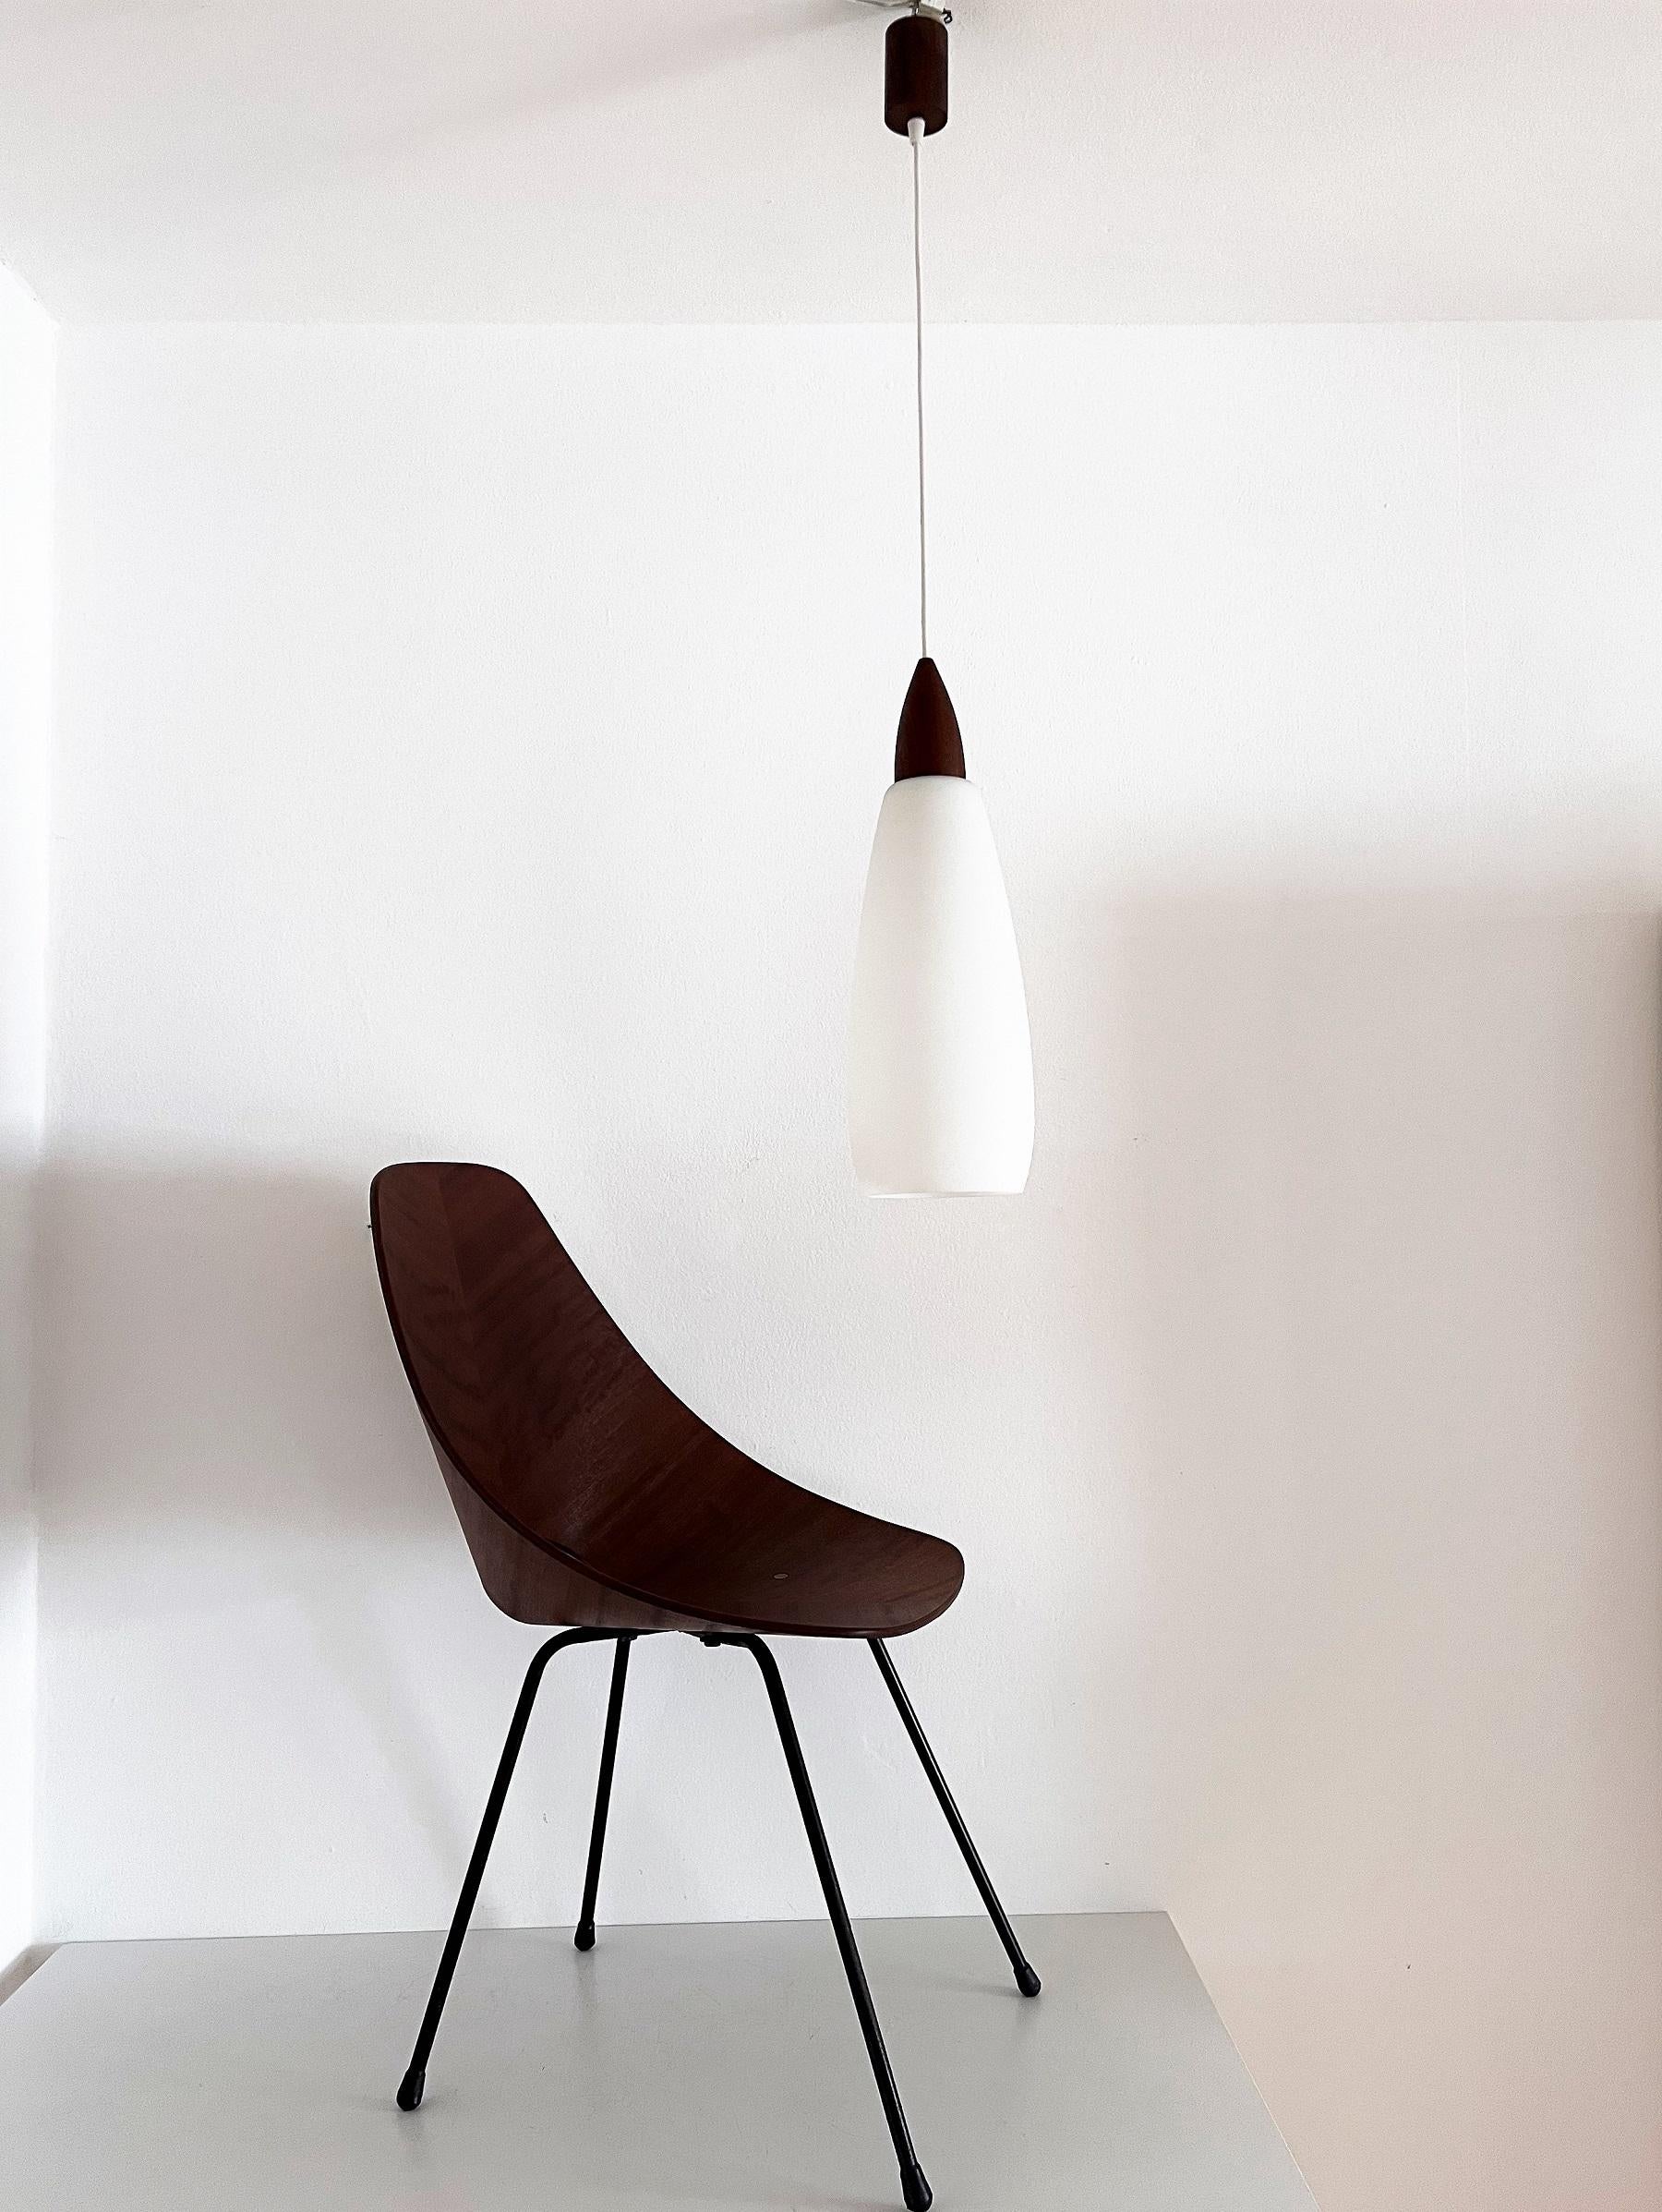 Beautiful glass and teak wood pendant lamp from the mid-century.
Made in Italy in the 1960s.
Fine craftsmanship on the teak wood parts, as well as the hand-crafted milk glass with soft touch.
Amazing soft light when illuminated.
The total height